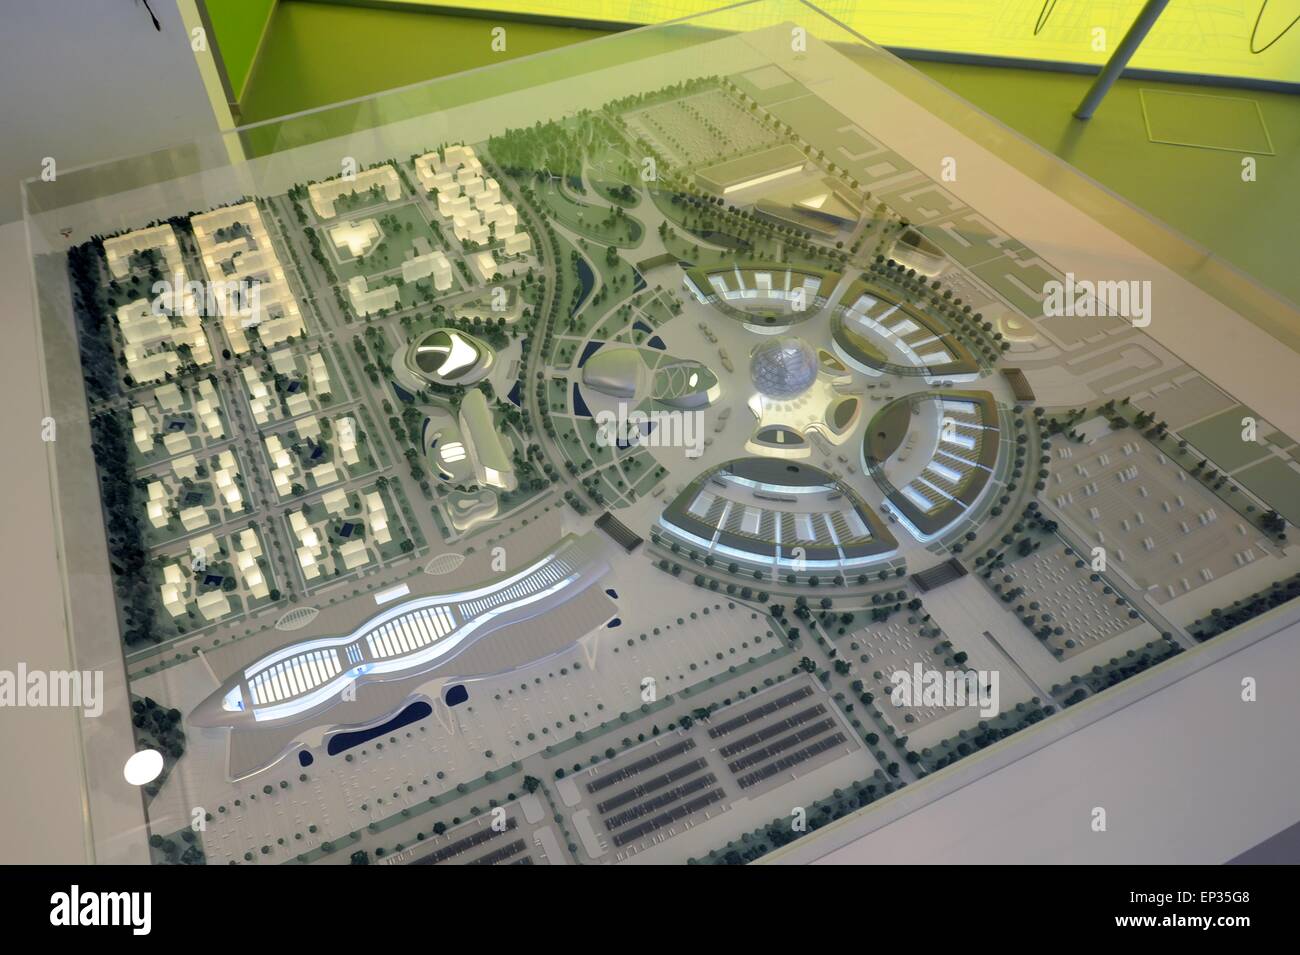 Milan, the World Exhibition Expo 2015, pavilion of Kazakhstan, architectural model of site for Expo 2017 in the capital Astana Stock Photo